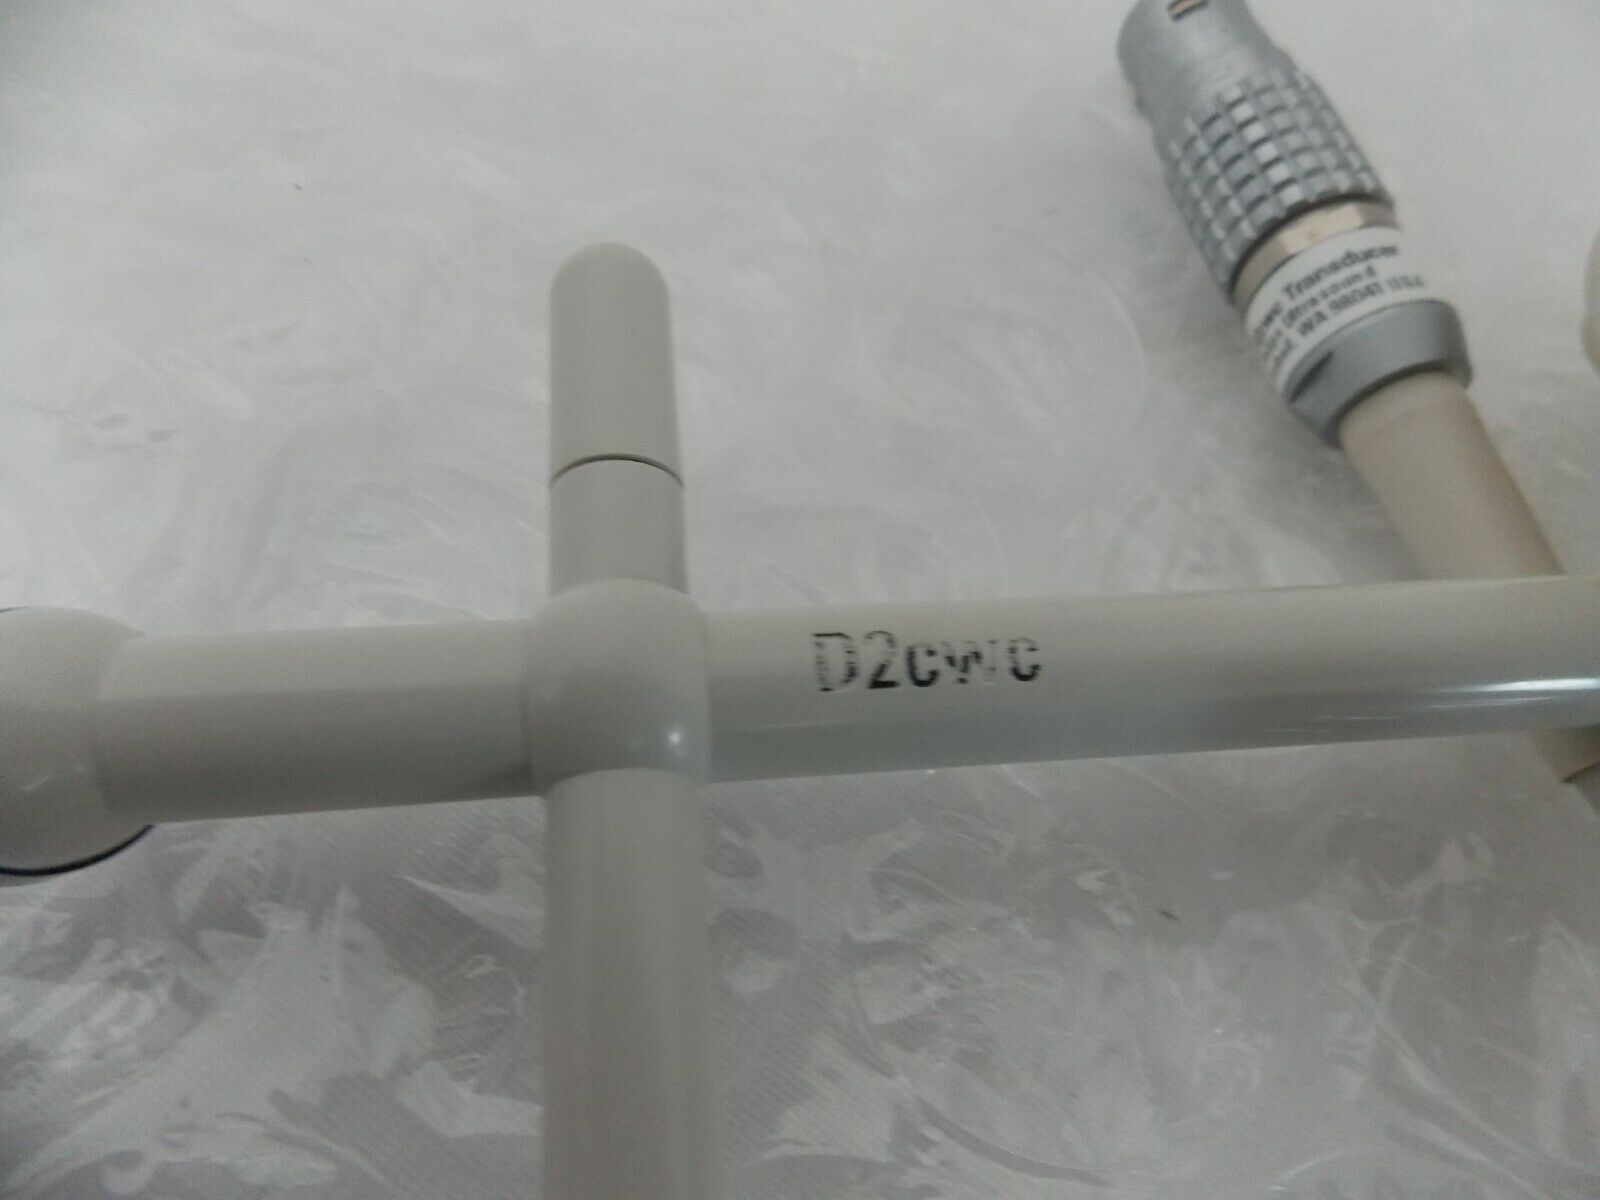 Philips D2cwc Ultrasound Transducer Probe (13) DIAGNOSTIC ULTRASOUND MACHINES FOR SALE